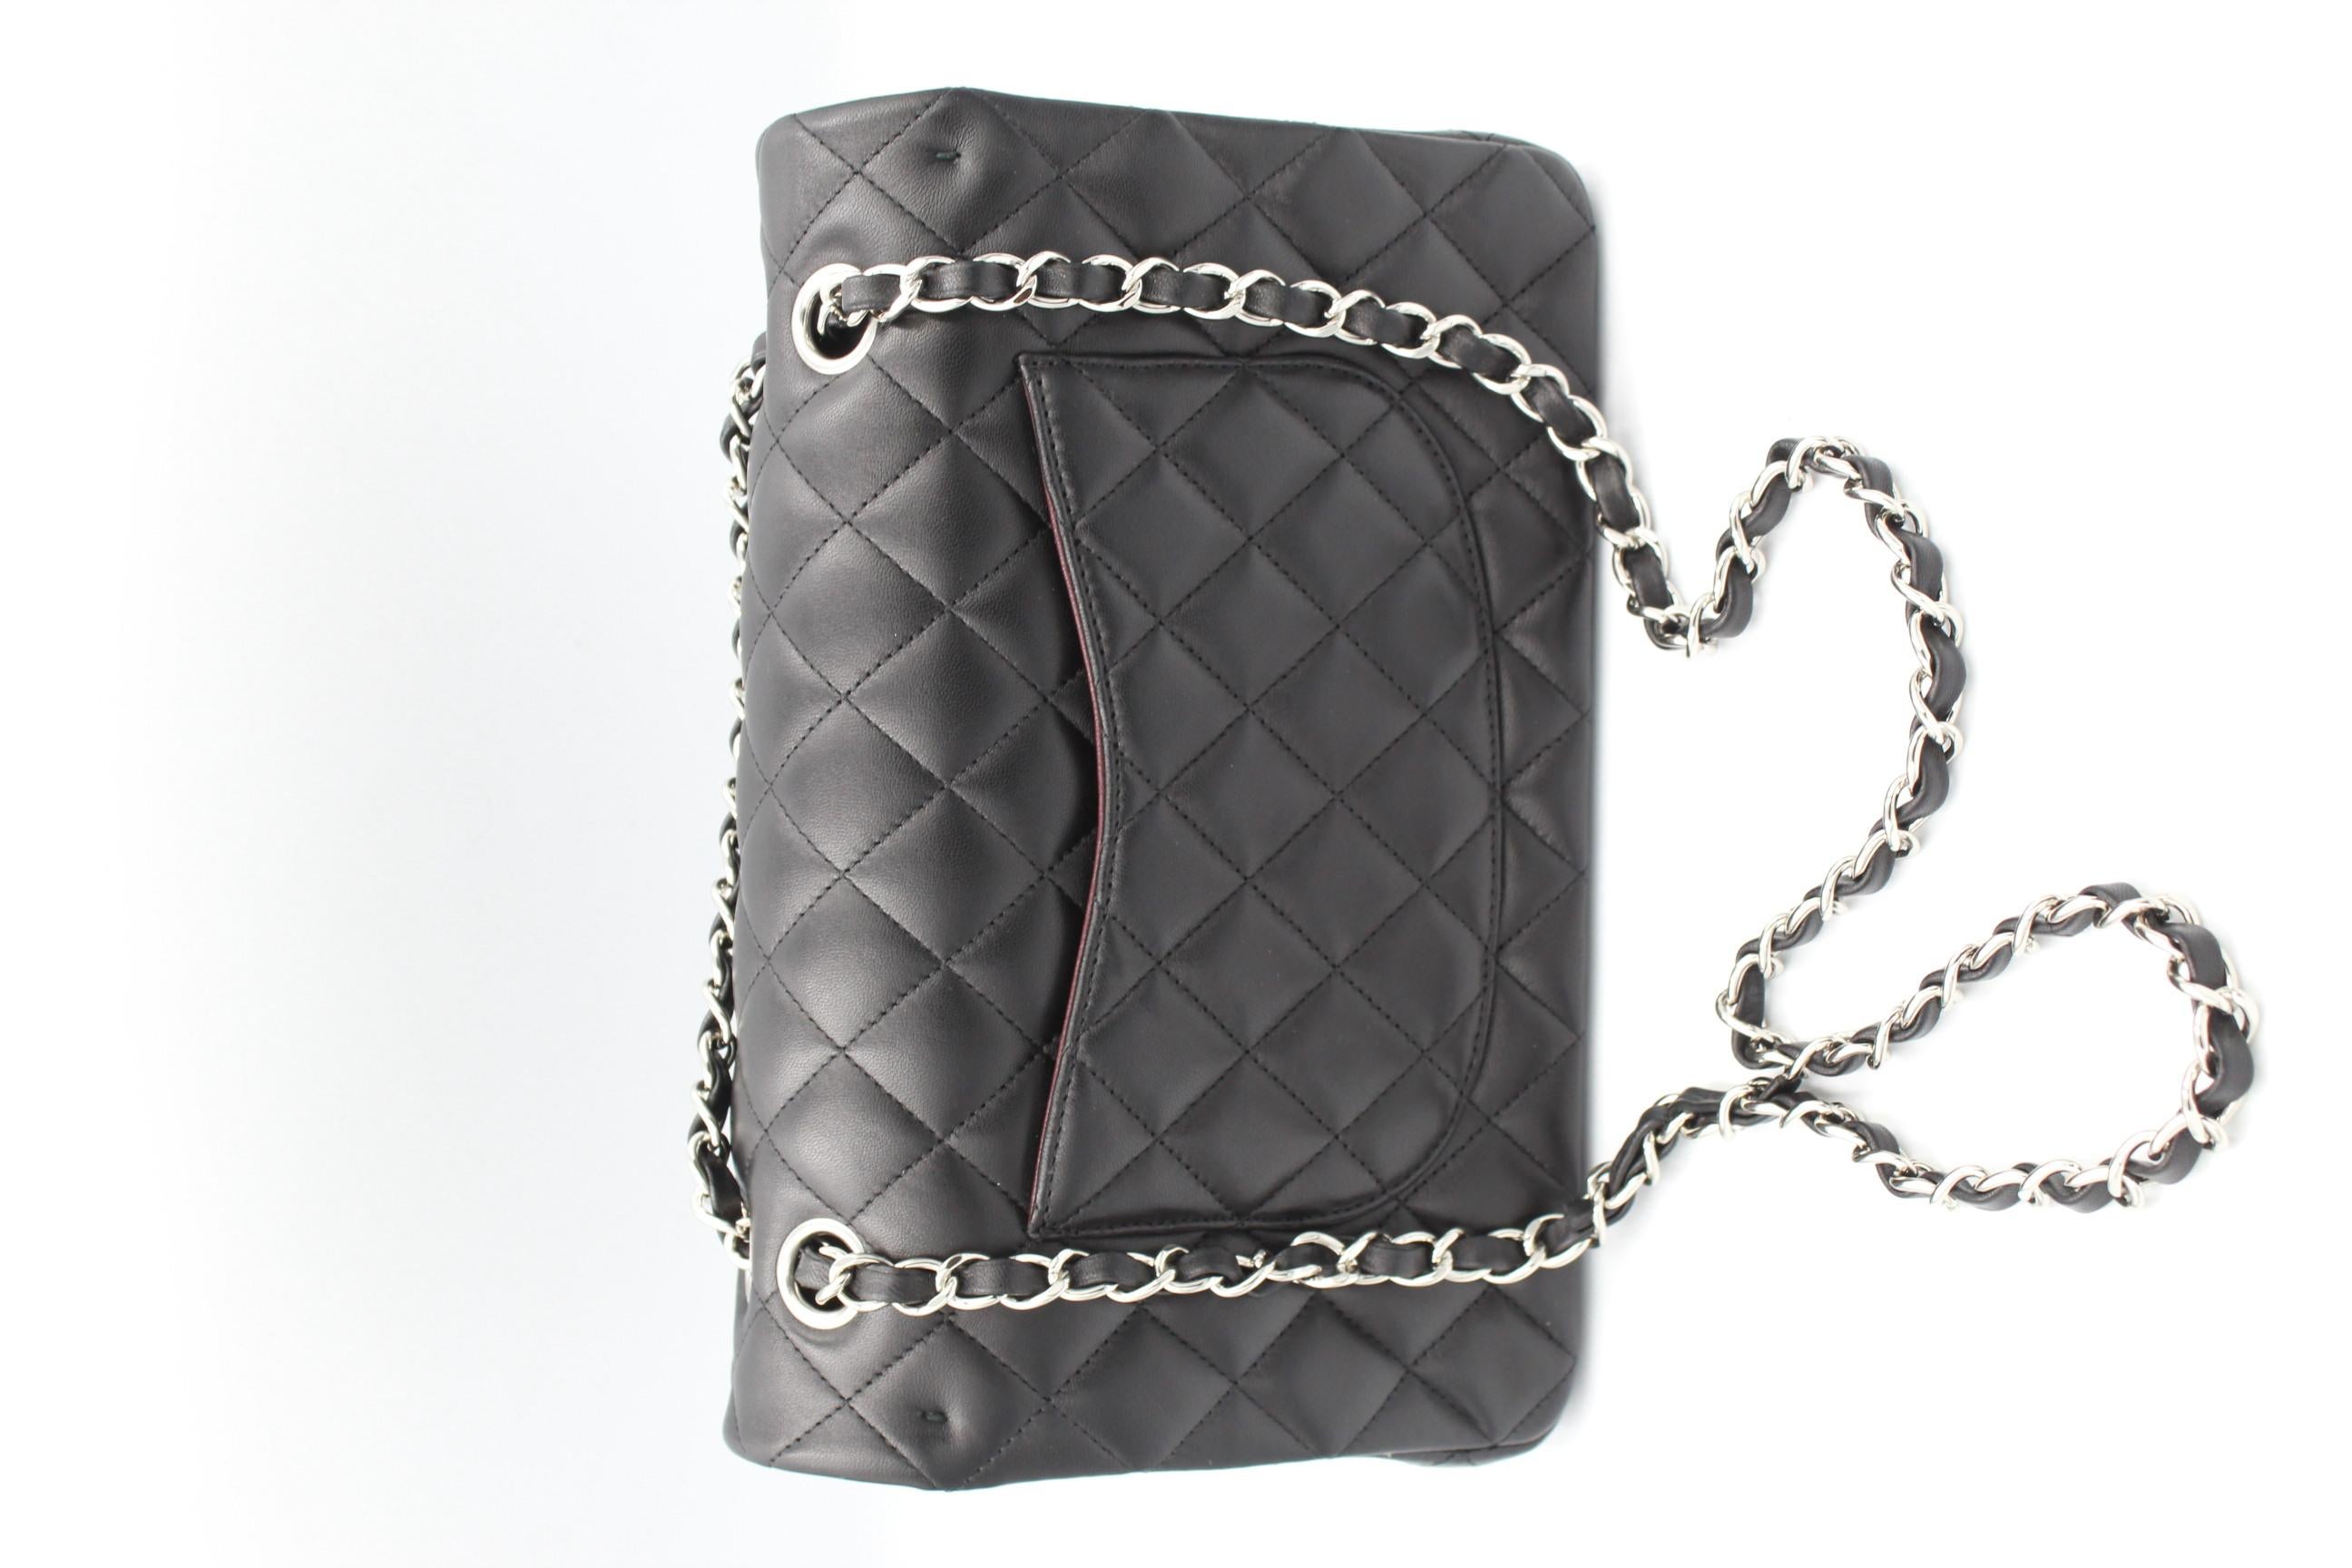 Chanel Timeless Bag in Black Lambskin Leather and Silver Hardware 1